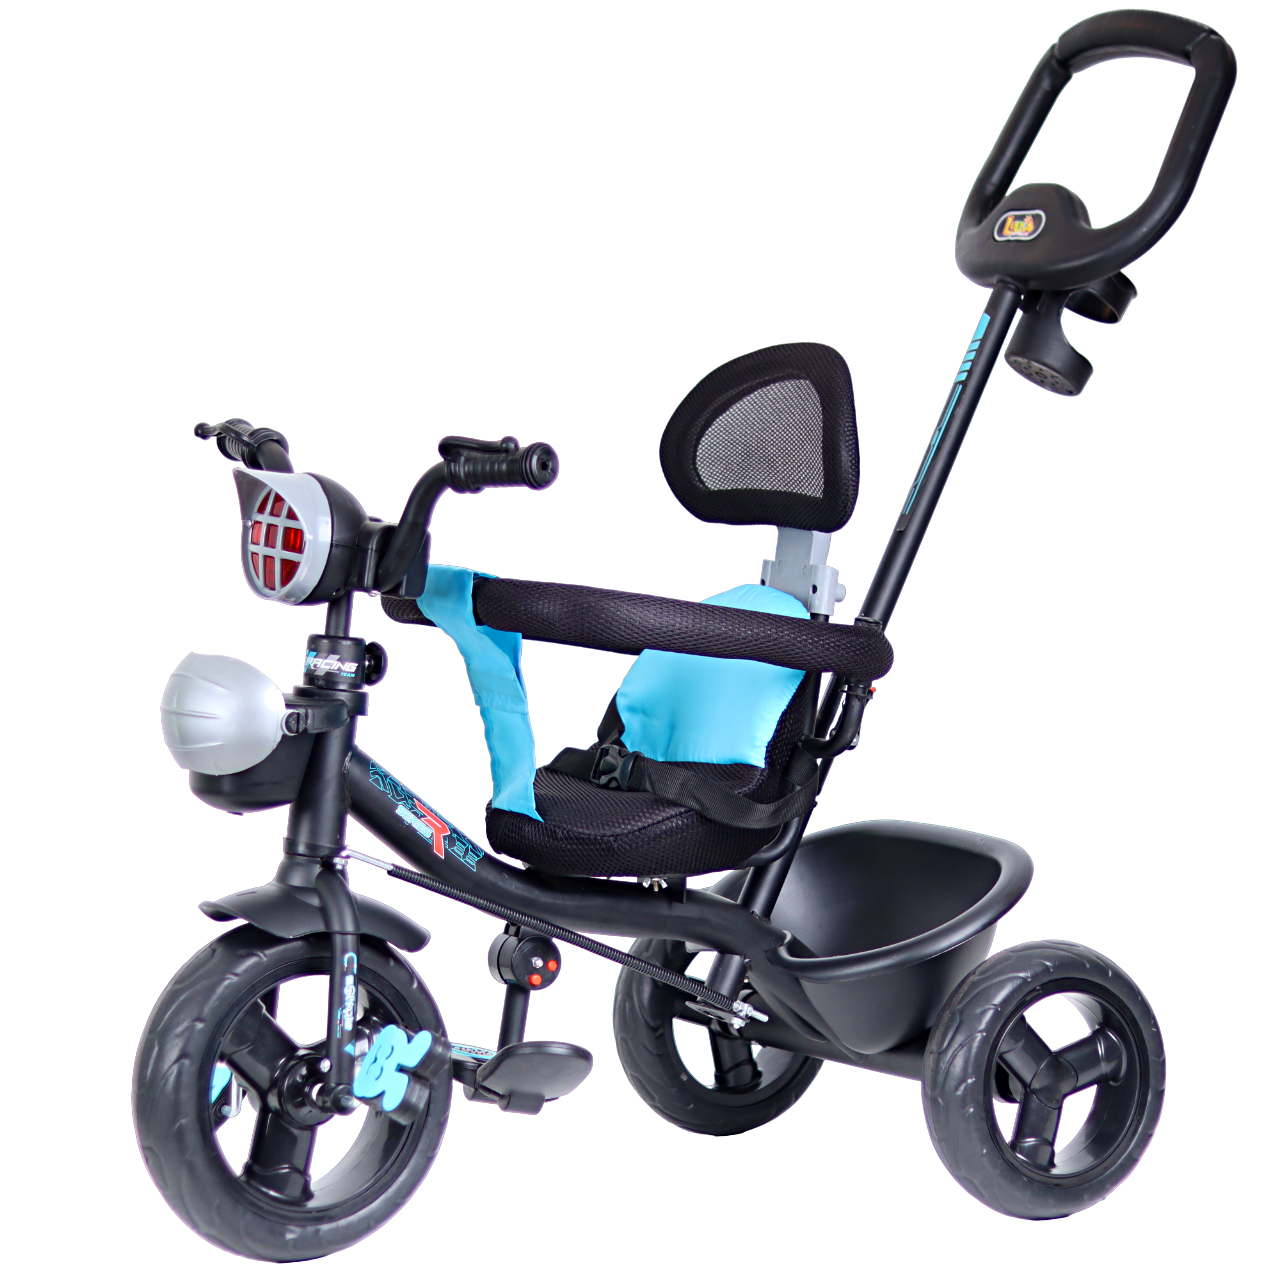 Luusa R9 Power Black Edition Tricycle for Kids - Hoodless Version